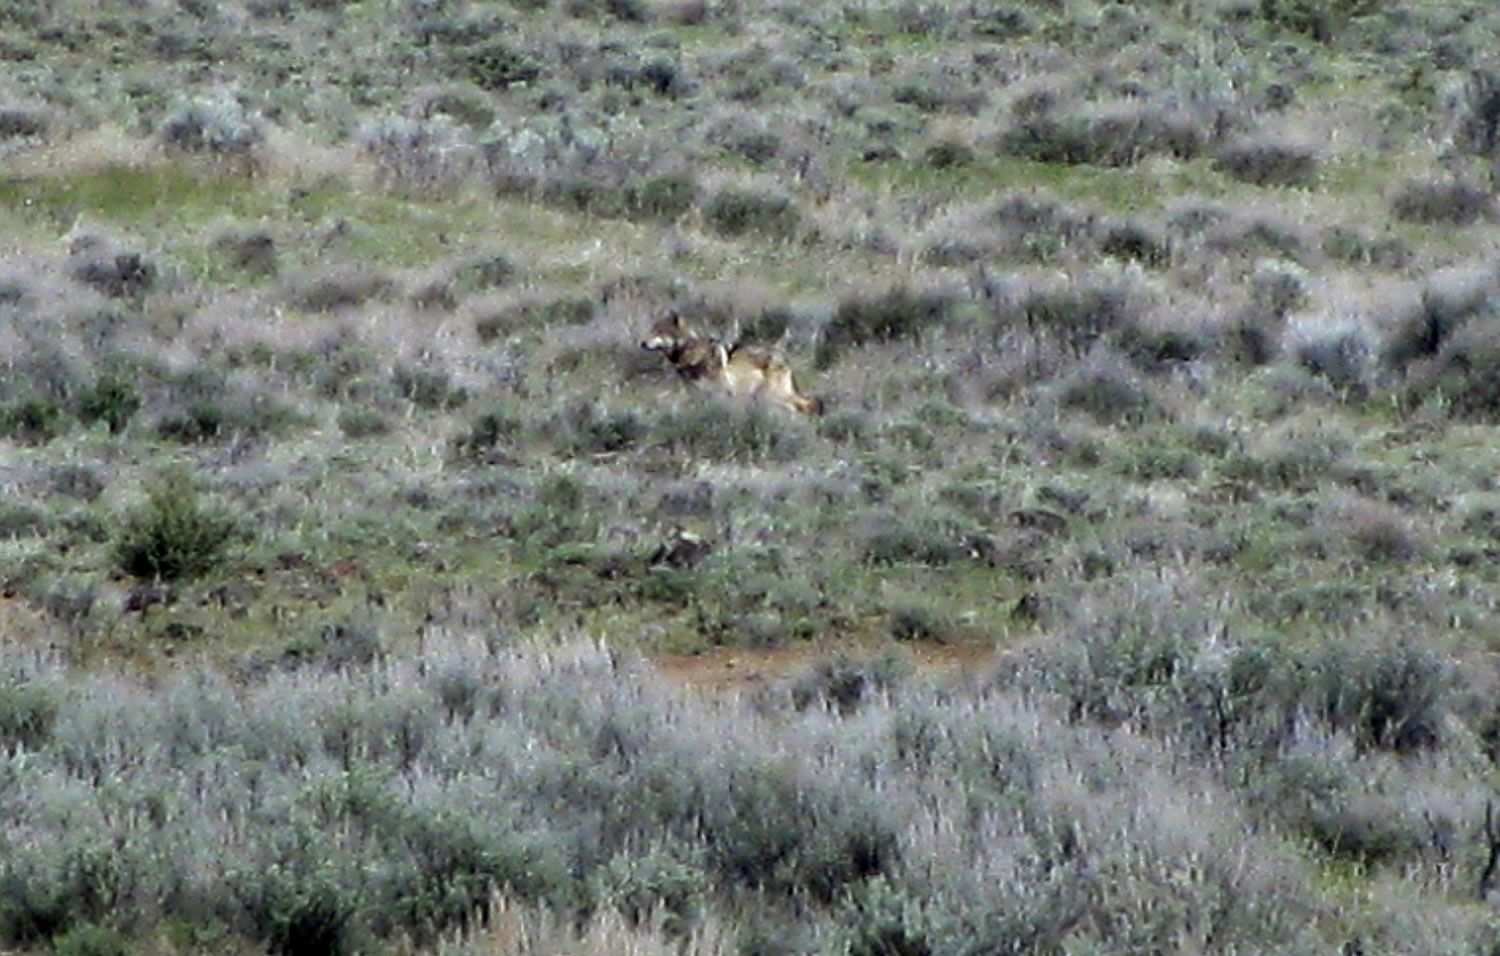 California Department of Fish and Game
OR-7, the Oregon wolf that has trekked across two states looking for a mate, is seen on a sagebrush hillside May 8 in Modoc County, Calif. California's lone gray wolf passed his one-year anniversary as a transplant resident of the Golden State with the same technical amenities many people possess, including a Twitter account and a website devoted to his travels. One state and two federal agencies now have to figure out how to manage the species when others inevitably follow him.